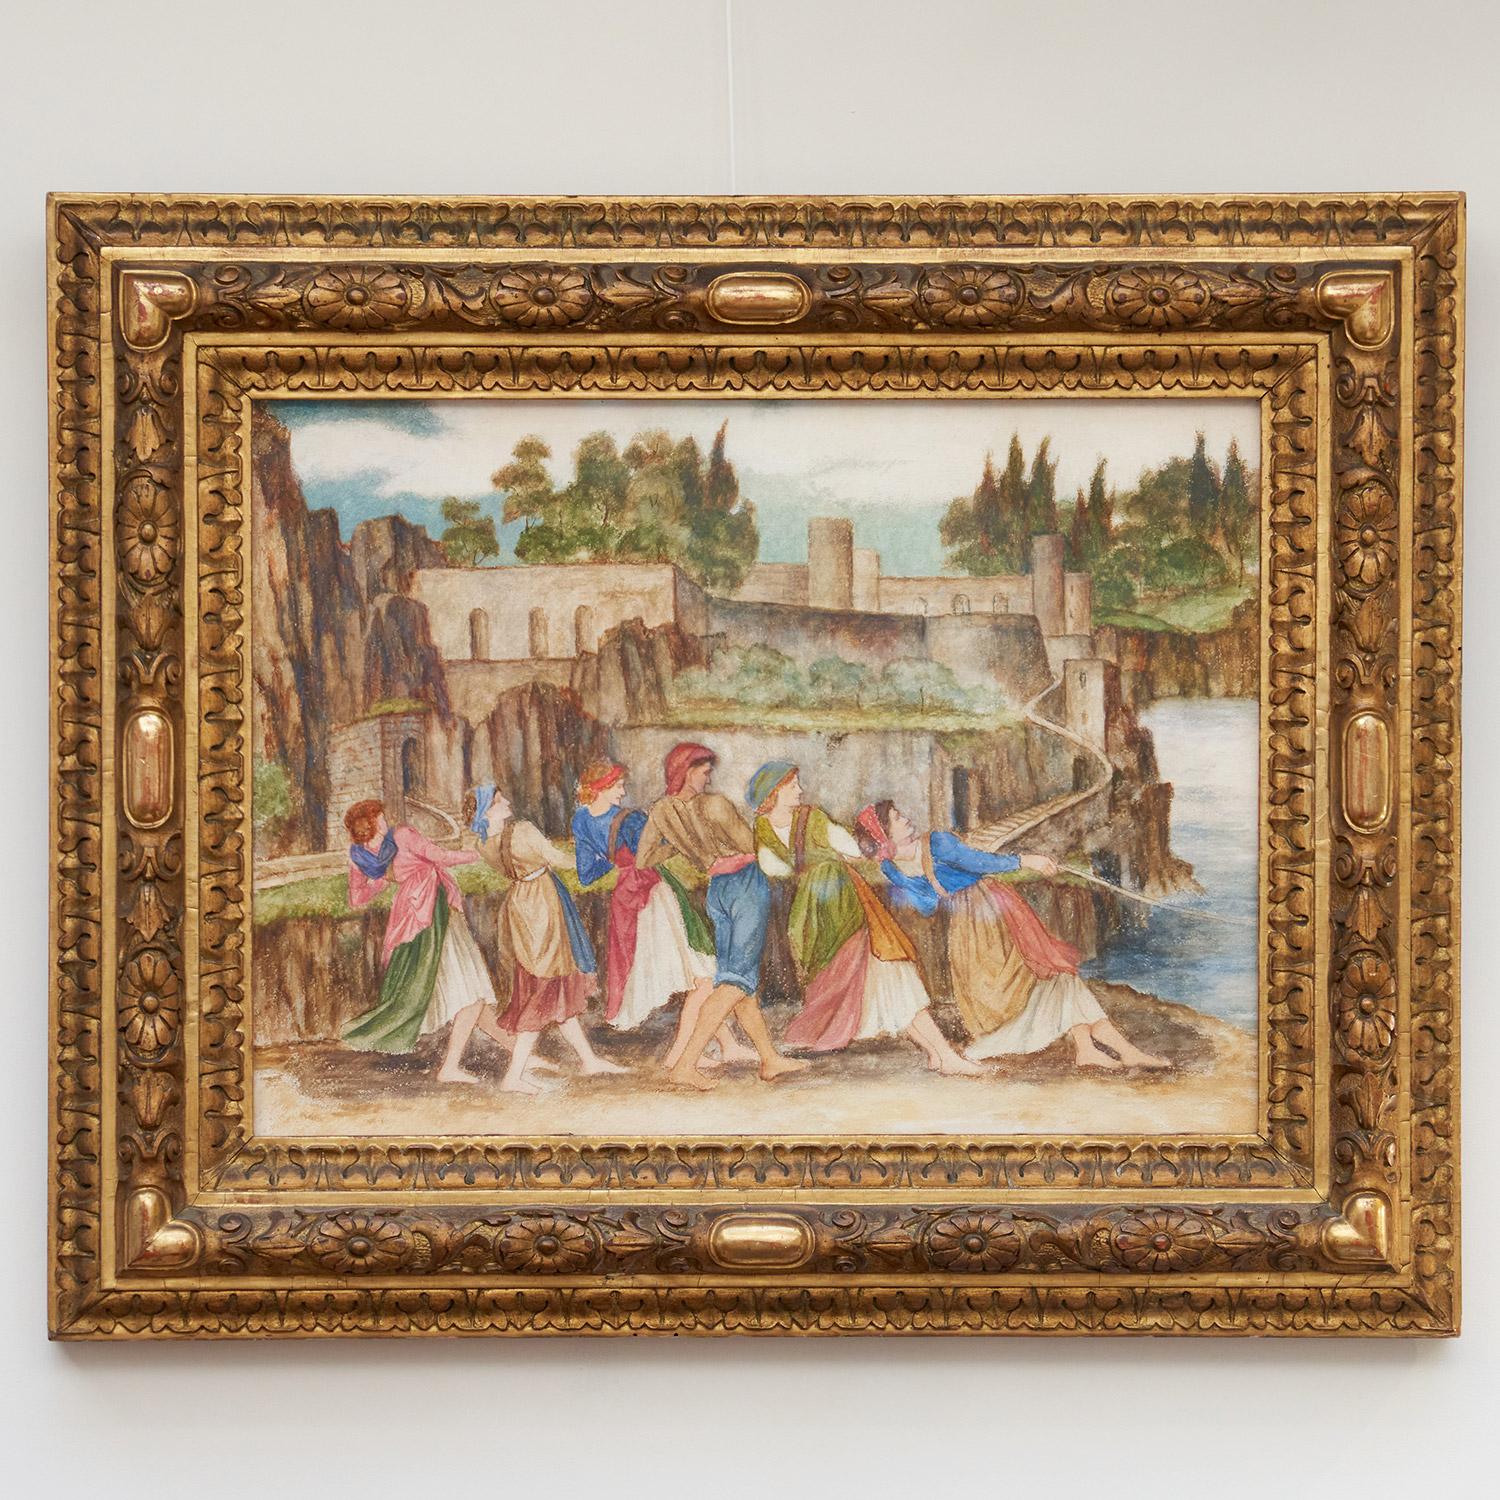 The Women of Sorrento' Pencil, watercolour and body colour painting by John Roddam Spencer Stanhope (1829-1908). The Women of Sorrento drawing in the boats with the help of a young man. Set to a Tuscan backdrop. Original frame. 

Stanhope